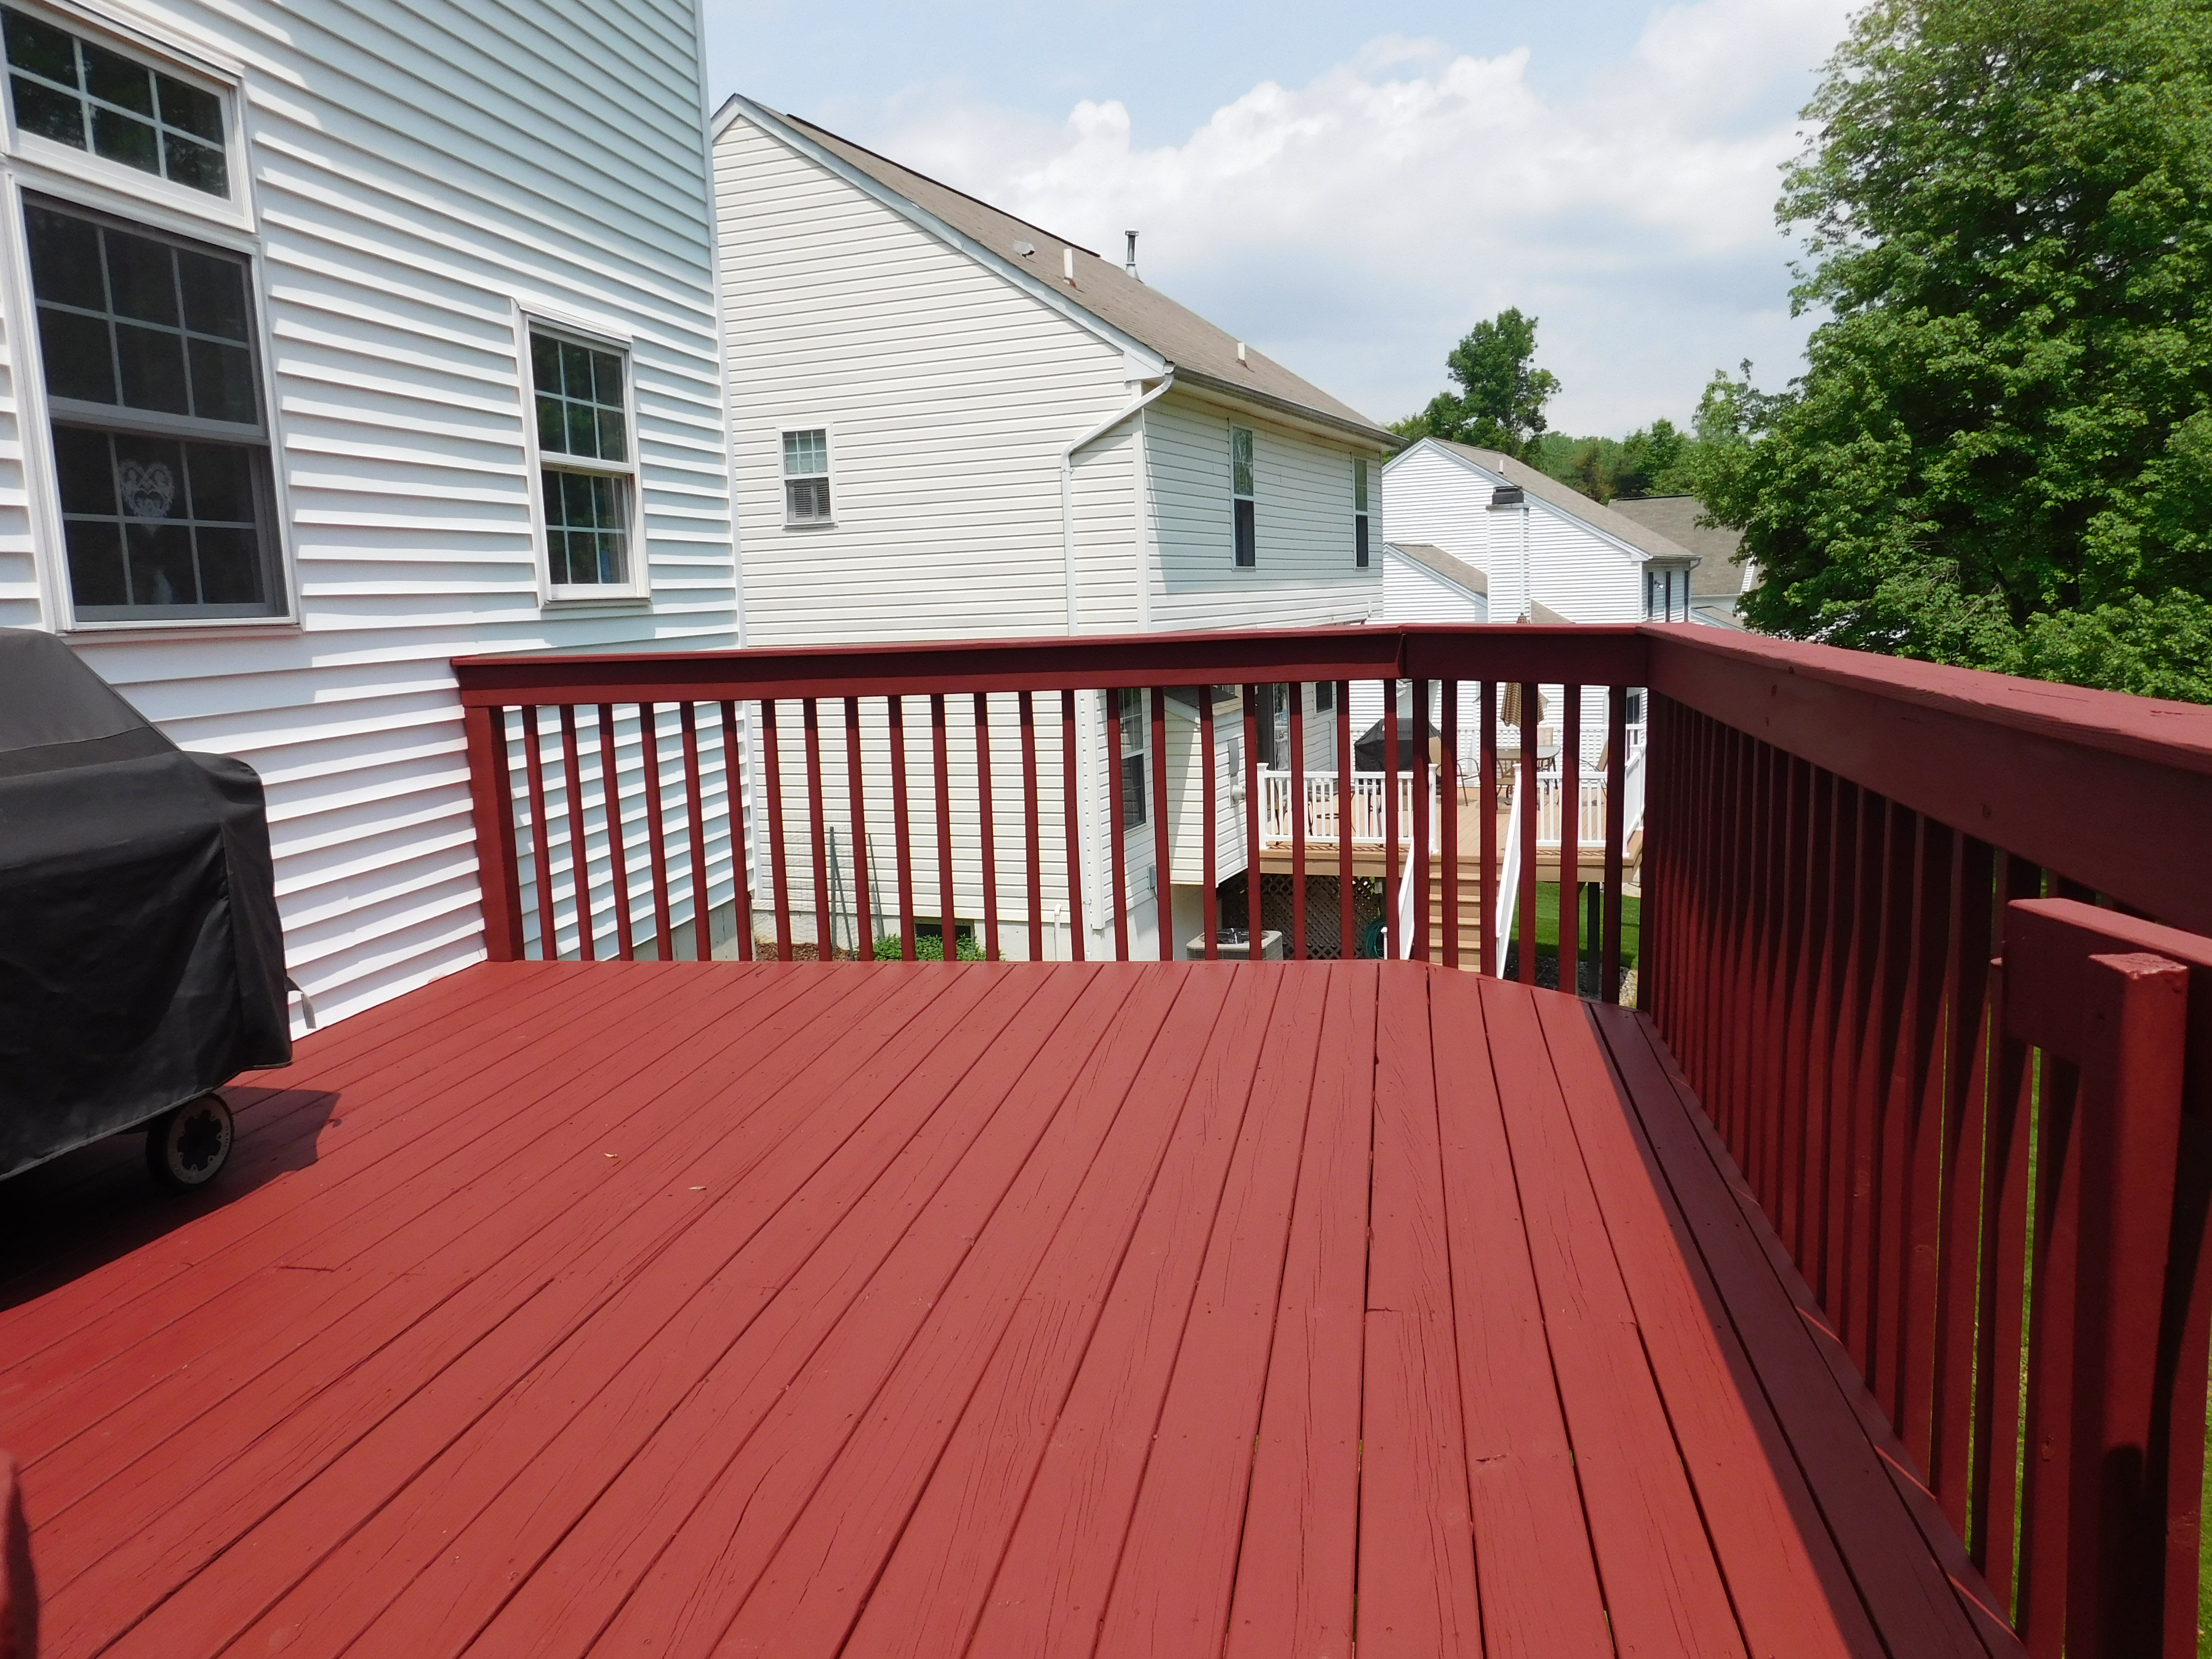 Sherwin William Acrylic Stain On Deck Color Coordinating A 2 Story Deck With The Sidinga Whole The Paint Can Says To Use A 017 To 021 Tip To Spray Plamuesya